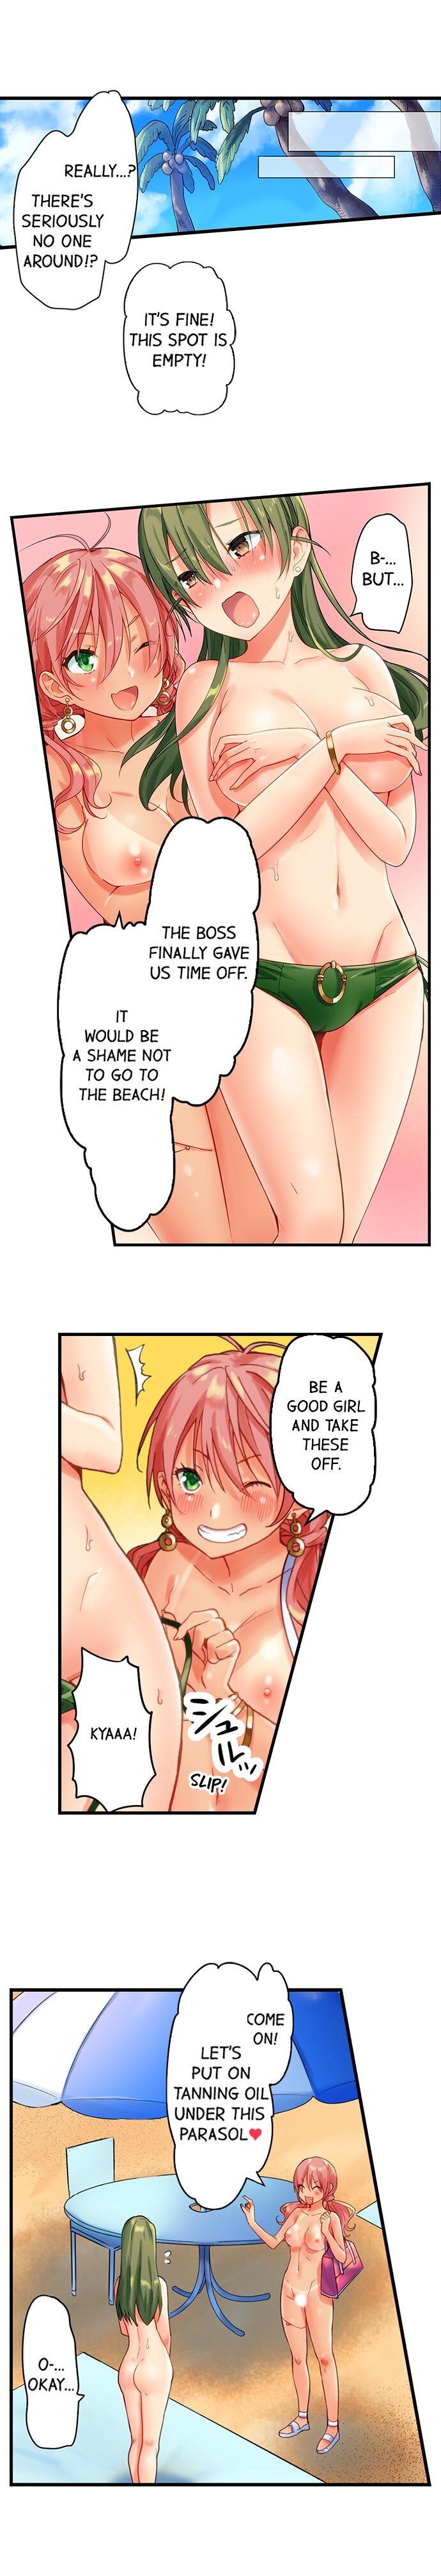 A Chaste Girl’s Climax at a Nudist Beach - Chapter 4 Page 8